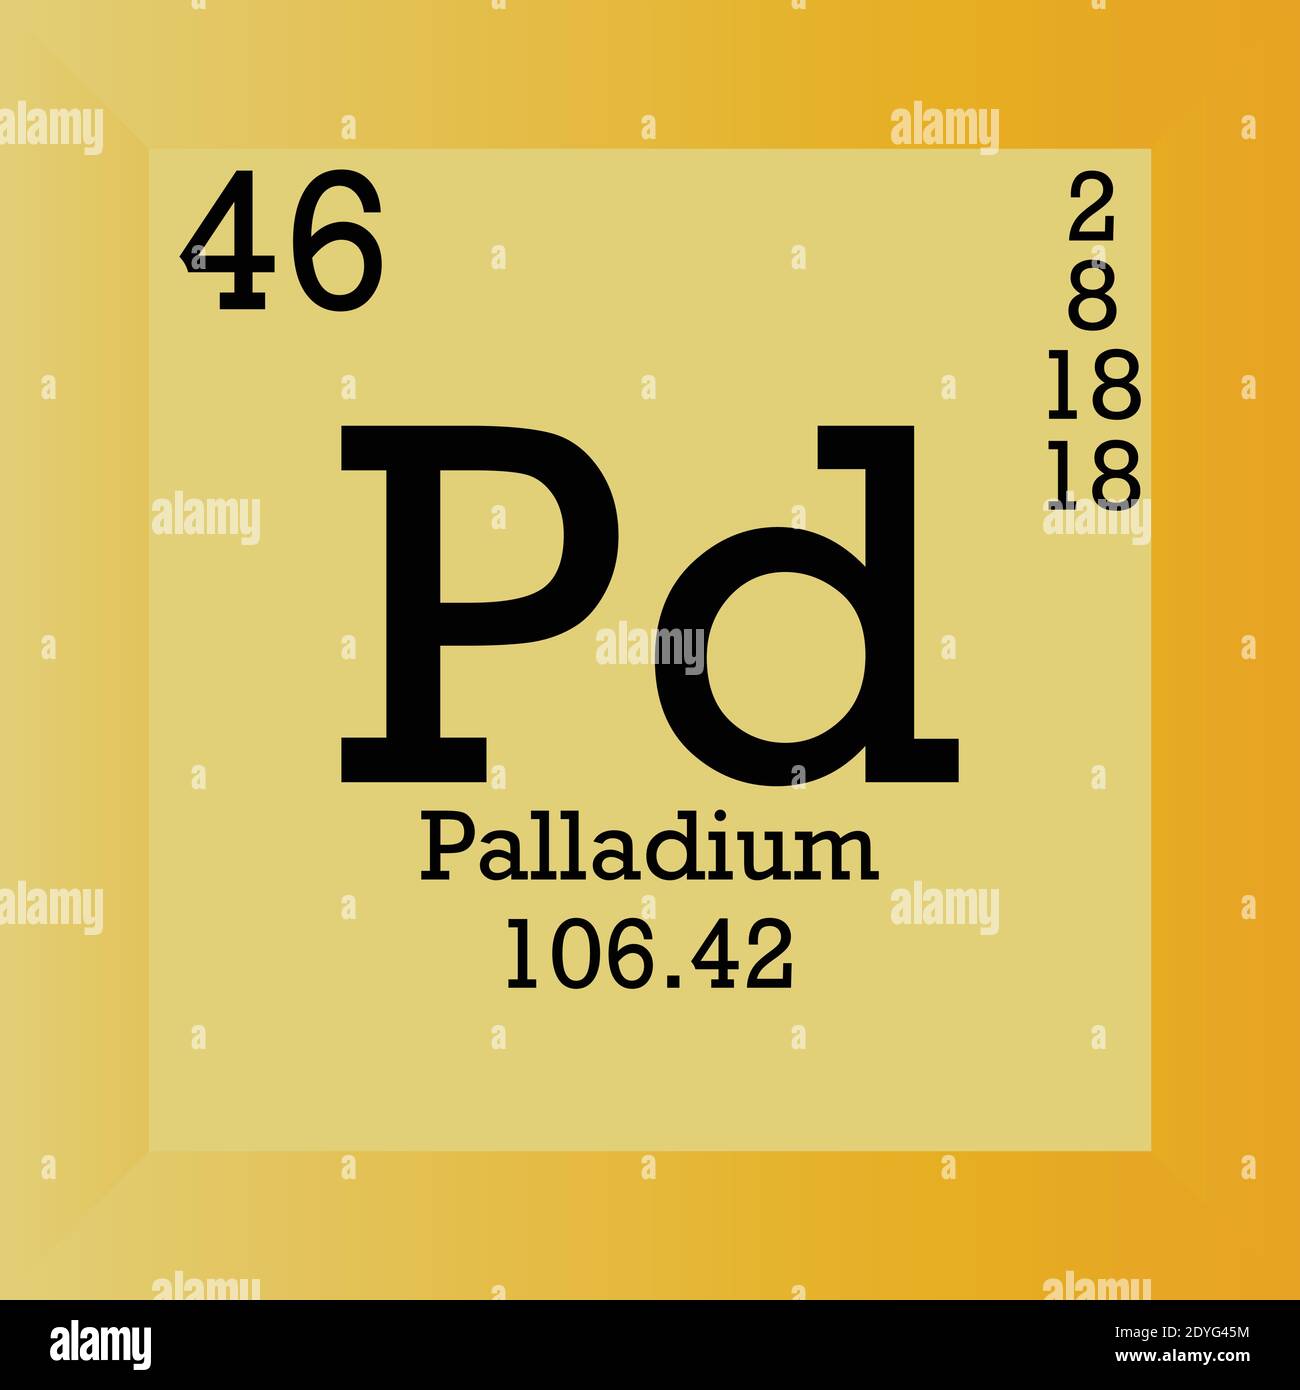 Pd Palladium Chemical Element Periodic Table. Single vector illustration,  element icon with molar mass, atomic number and electron conf Stock Vector  Image & Art - Alamy